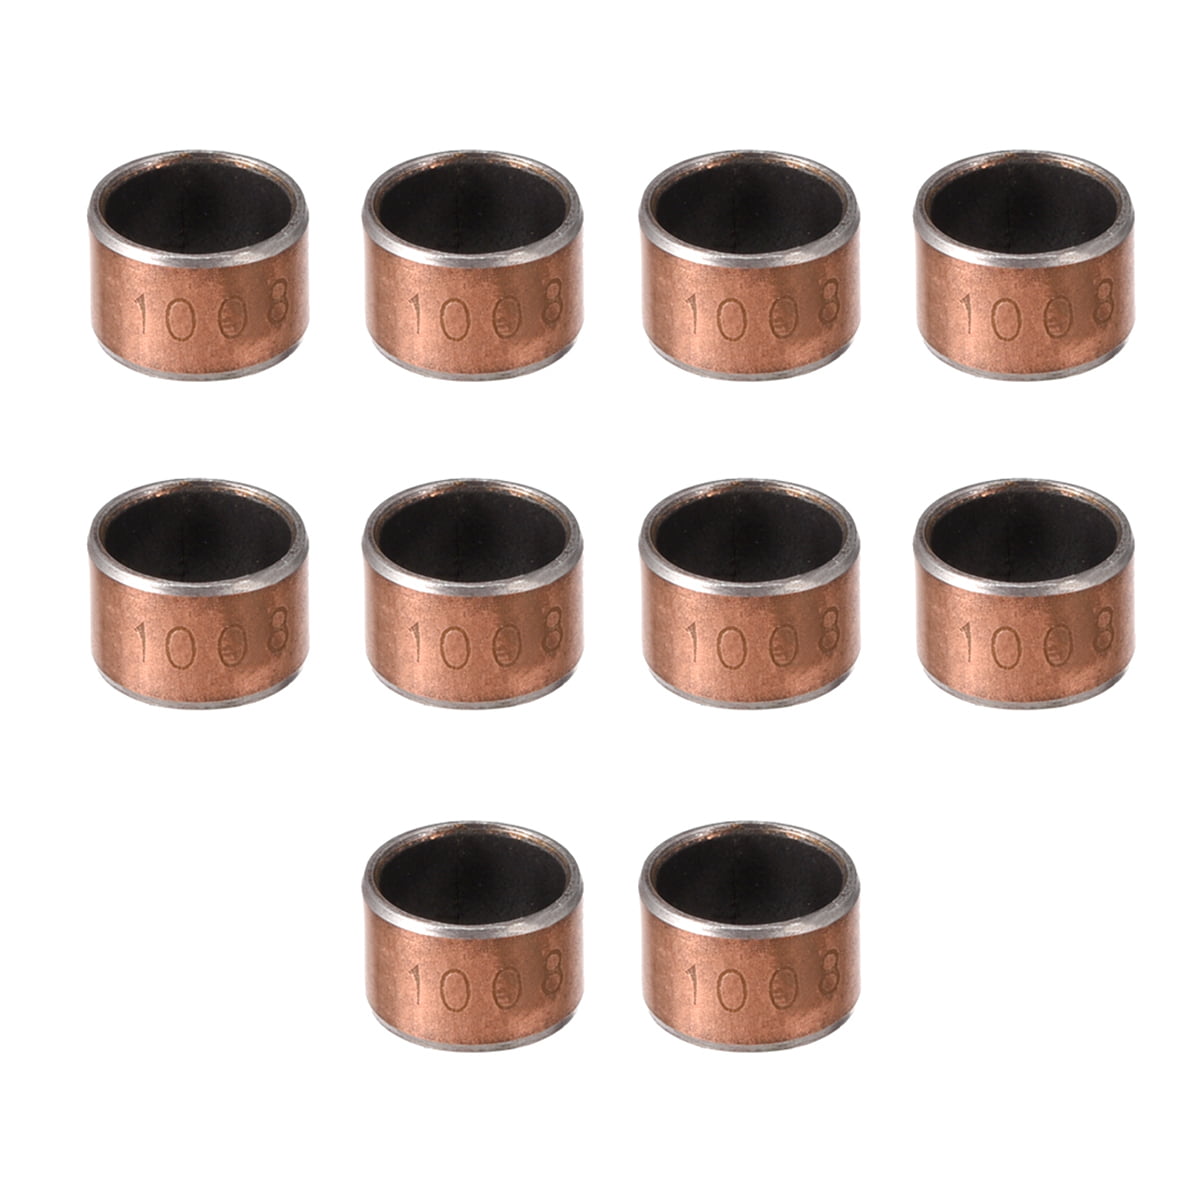 Othmro Sleeve Bearing 12mm Bore x 14mm OD x 10mm Length Plain Bearings Wrapped Oilless Bushings Pack of 3